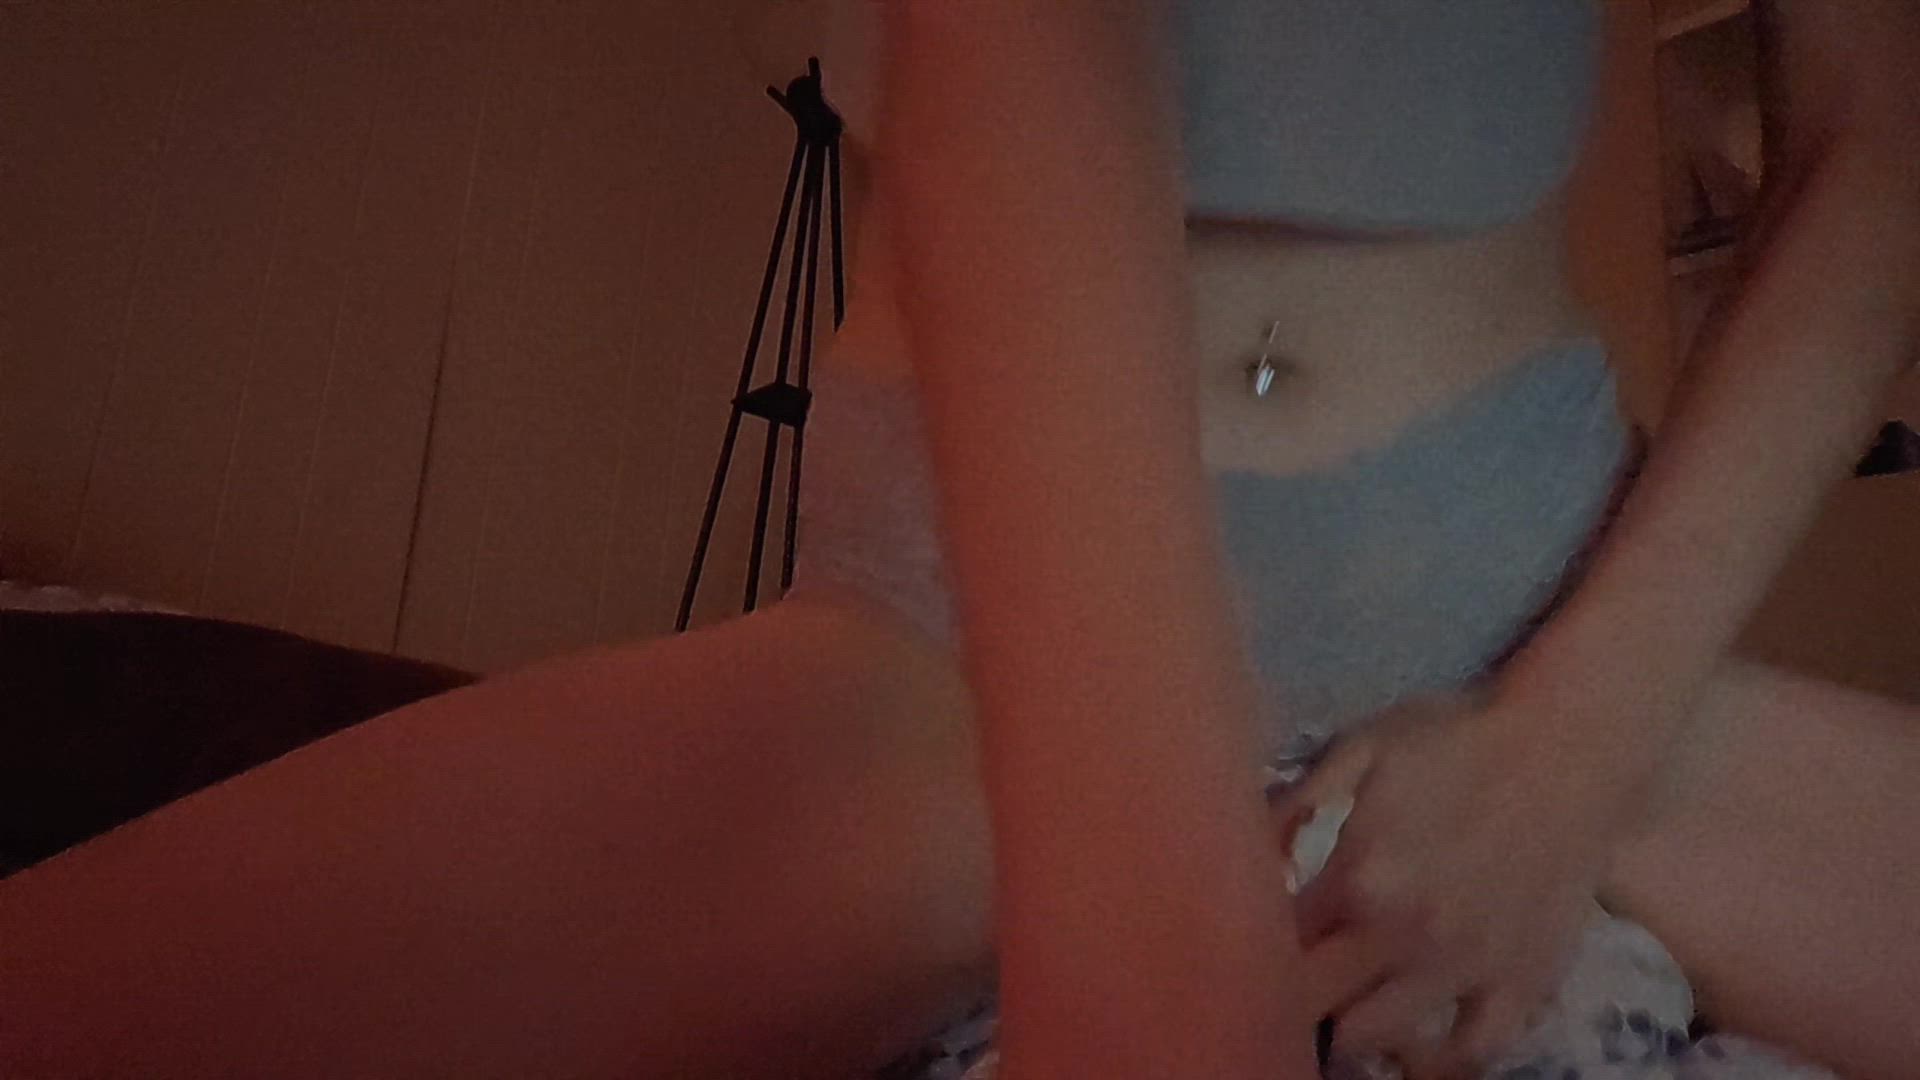 Amateur porn video with onlyfans model prettybbyxo <strong>@prettybby.xo</strong>